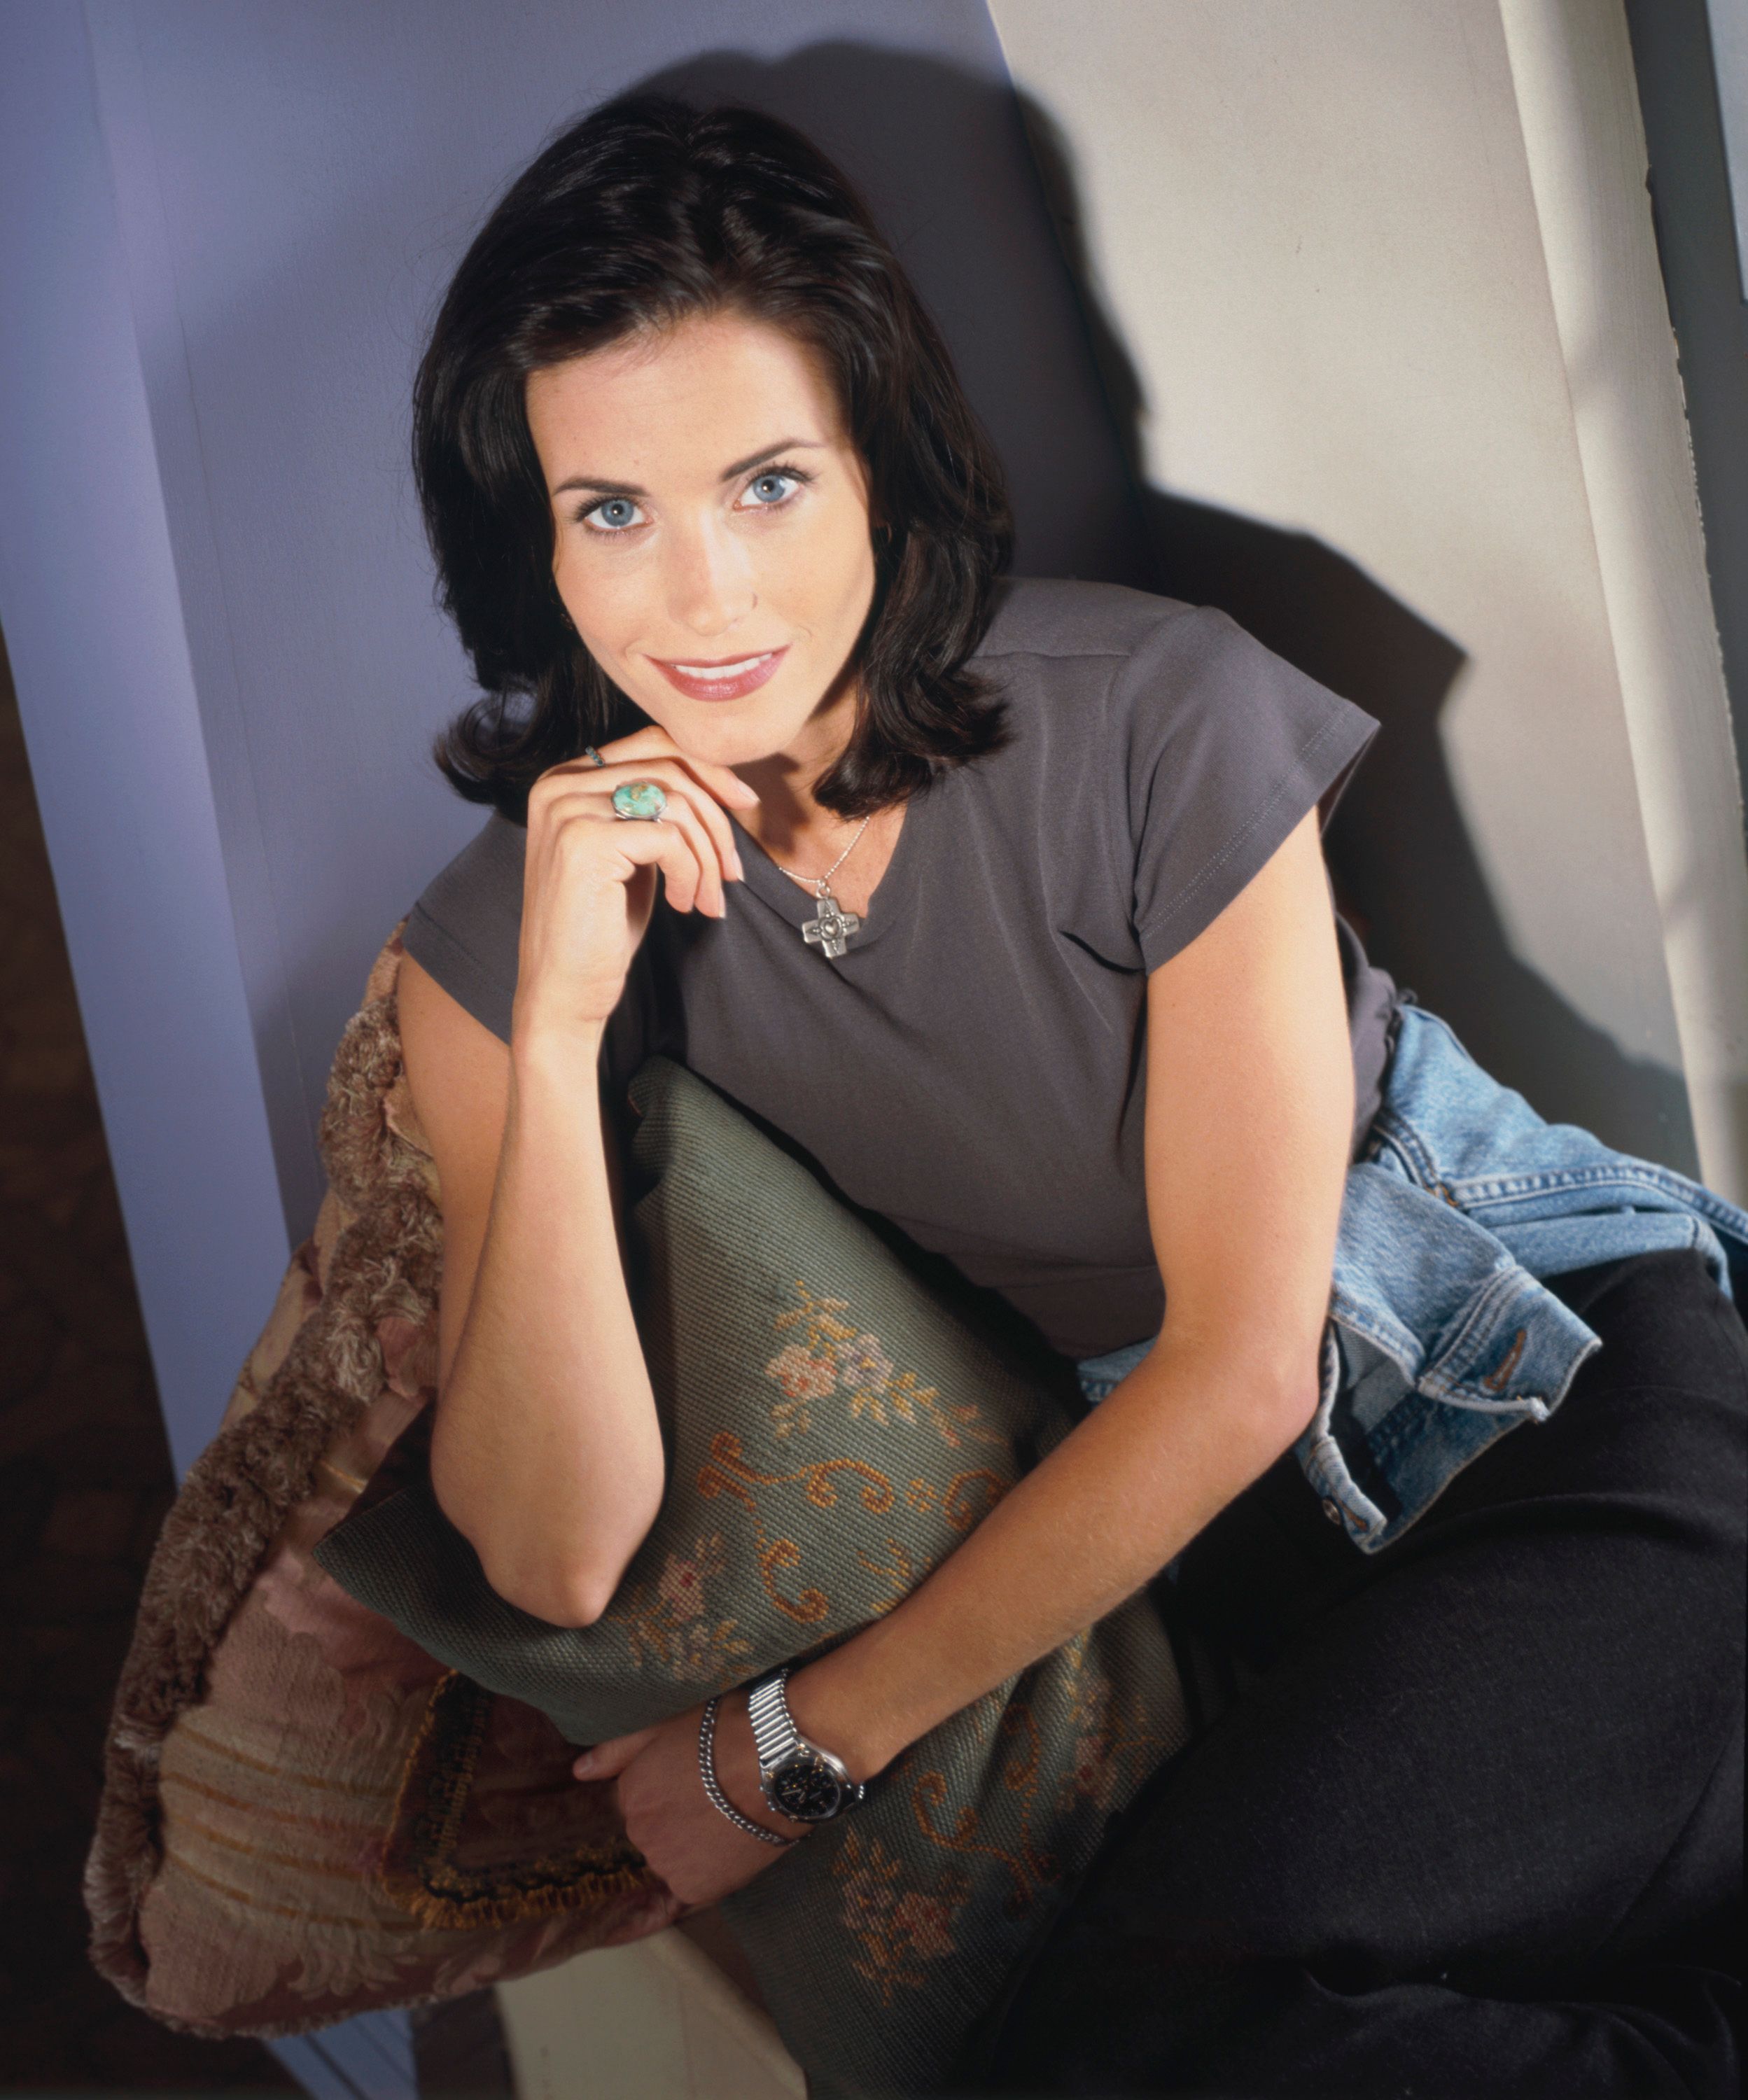 1994 Publicity shot from the first season of "Friends" -- Courteney Cox as Monica Geller | Source: Getty Images